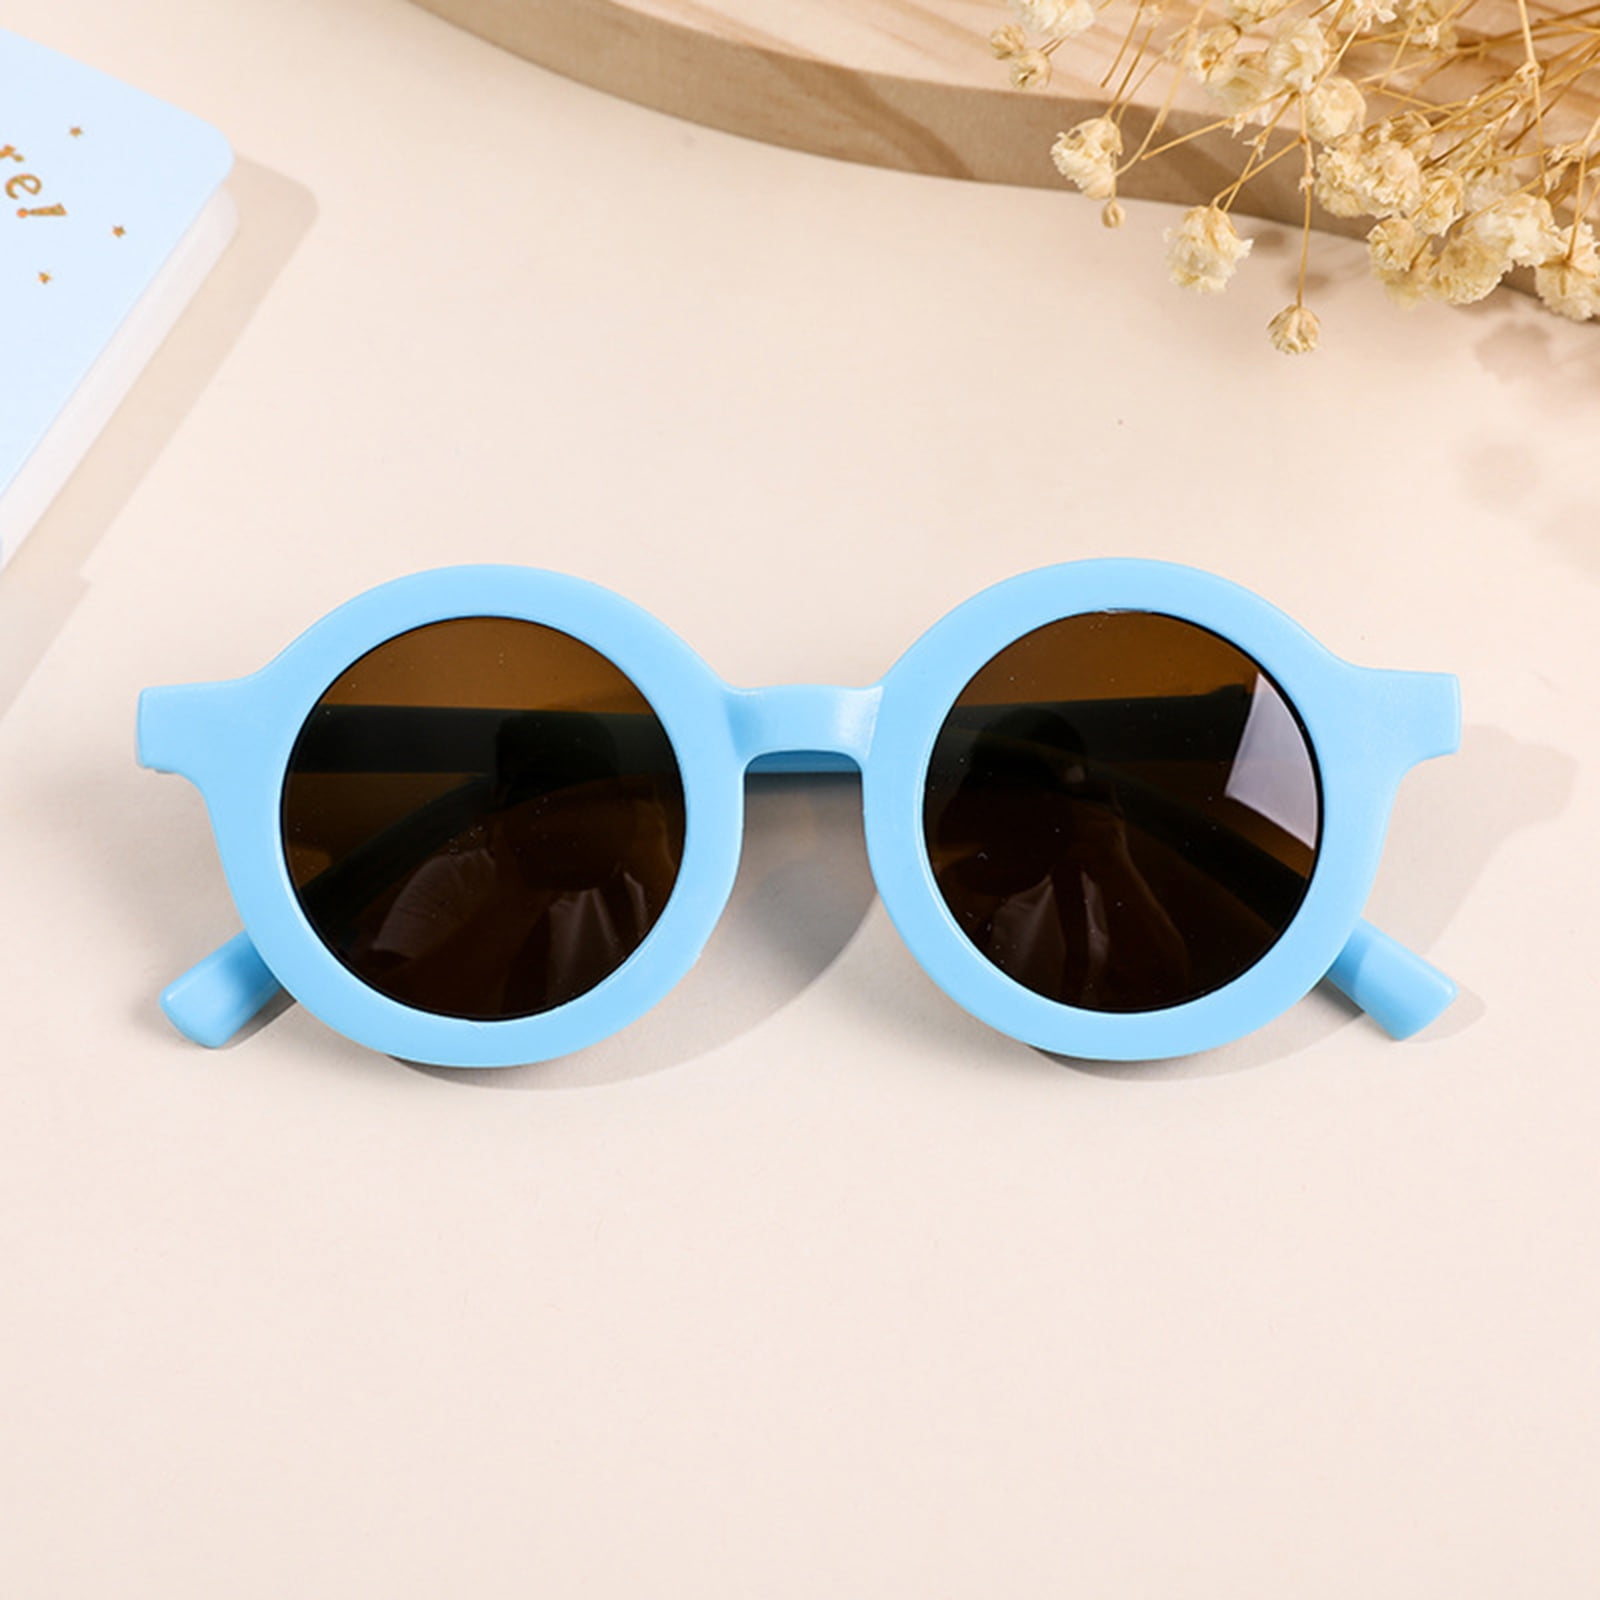 Buy 8 Pairs Kids Sunglasses Round Retro Circle Sunglasses for Toddler Girls  Baby Sunglasses, Age 3-10 (Elegant Color) at Amazon.in